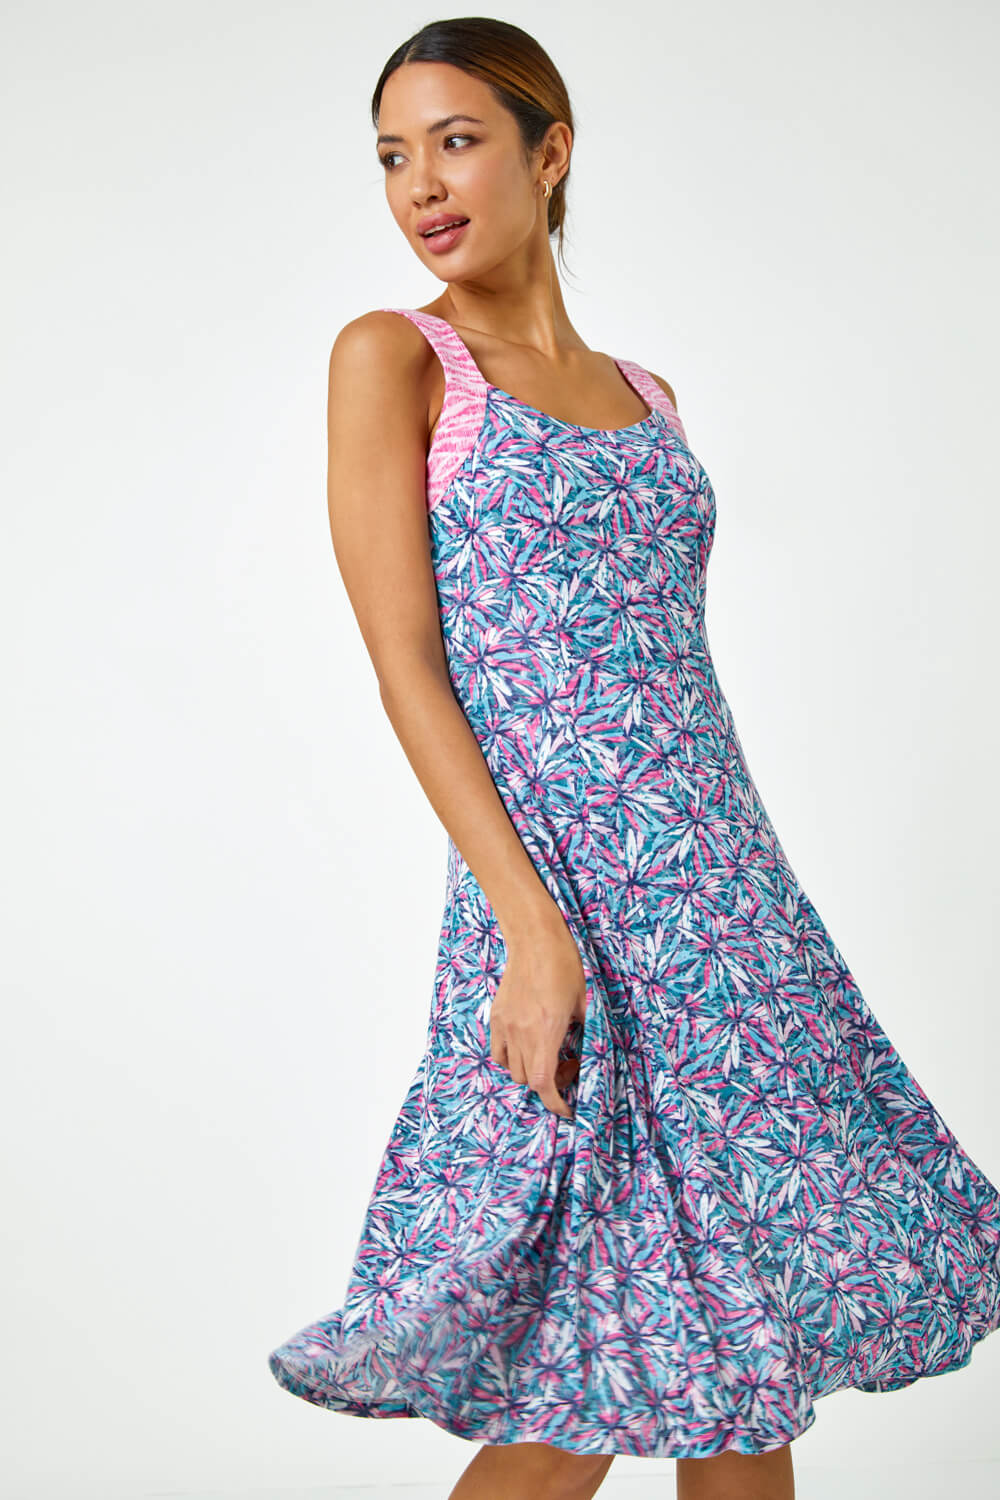 PINK Sleeveless Contrast Floral Print Dress, Image 2 of 5